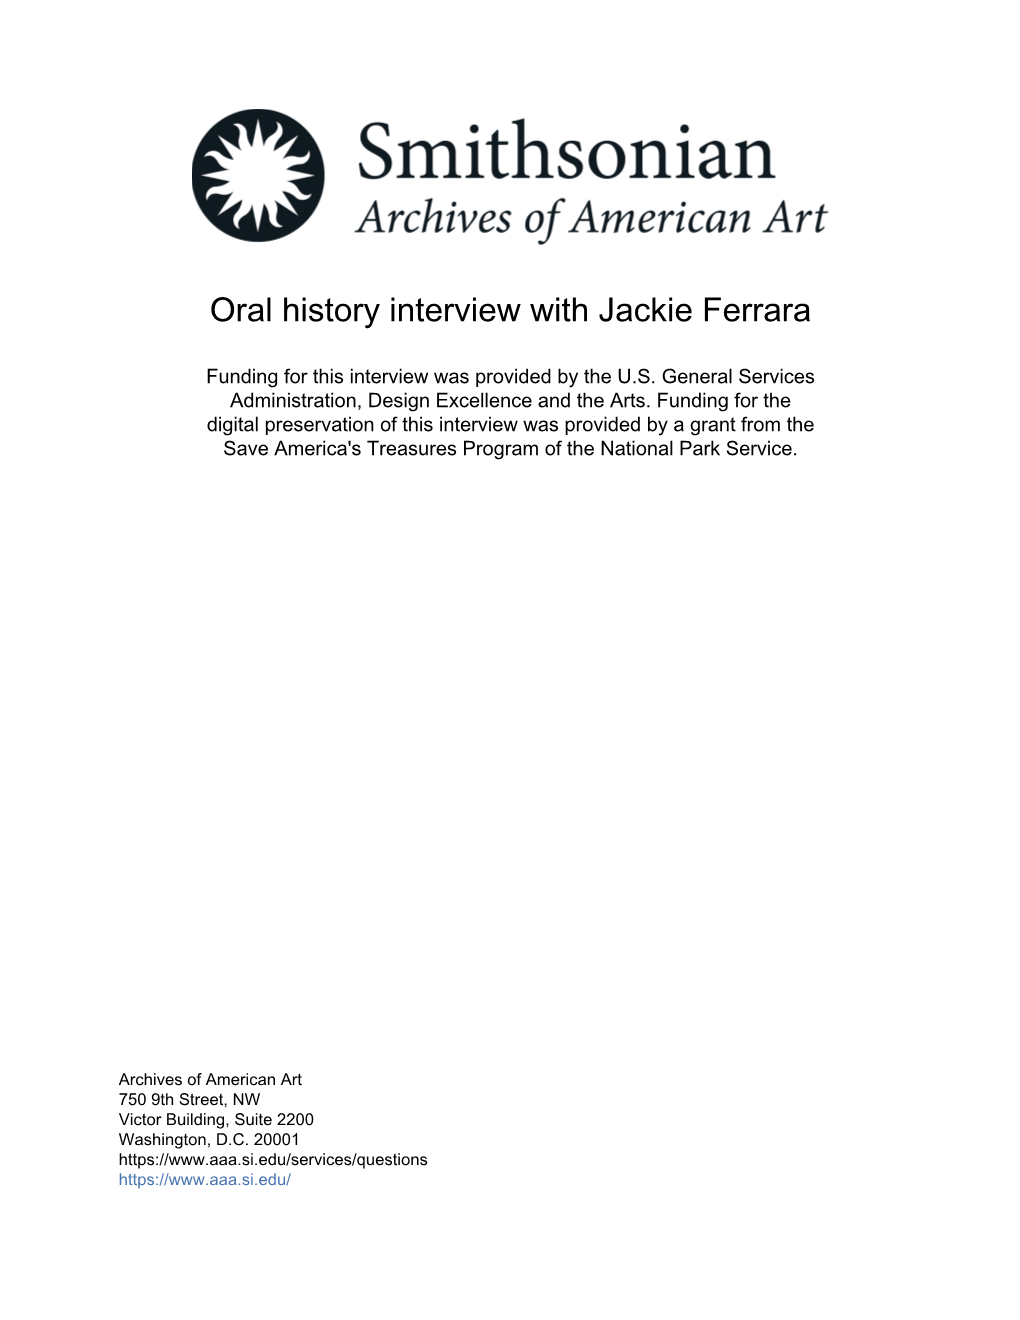 Oral History Interview with Jackie Ferrara